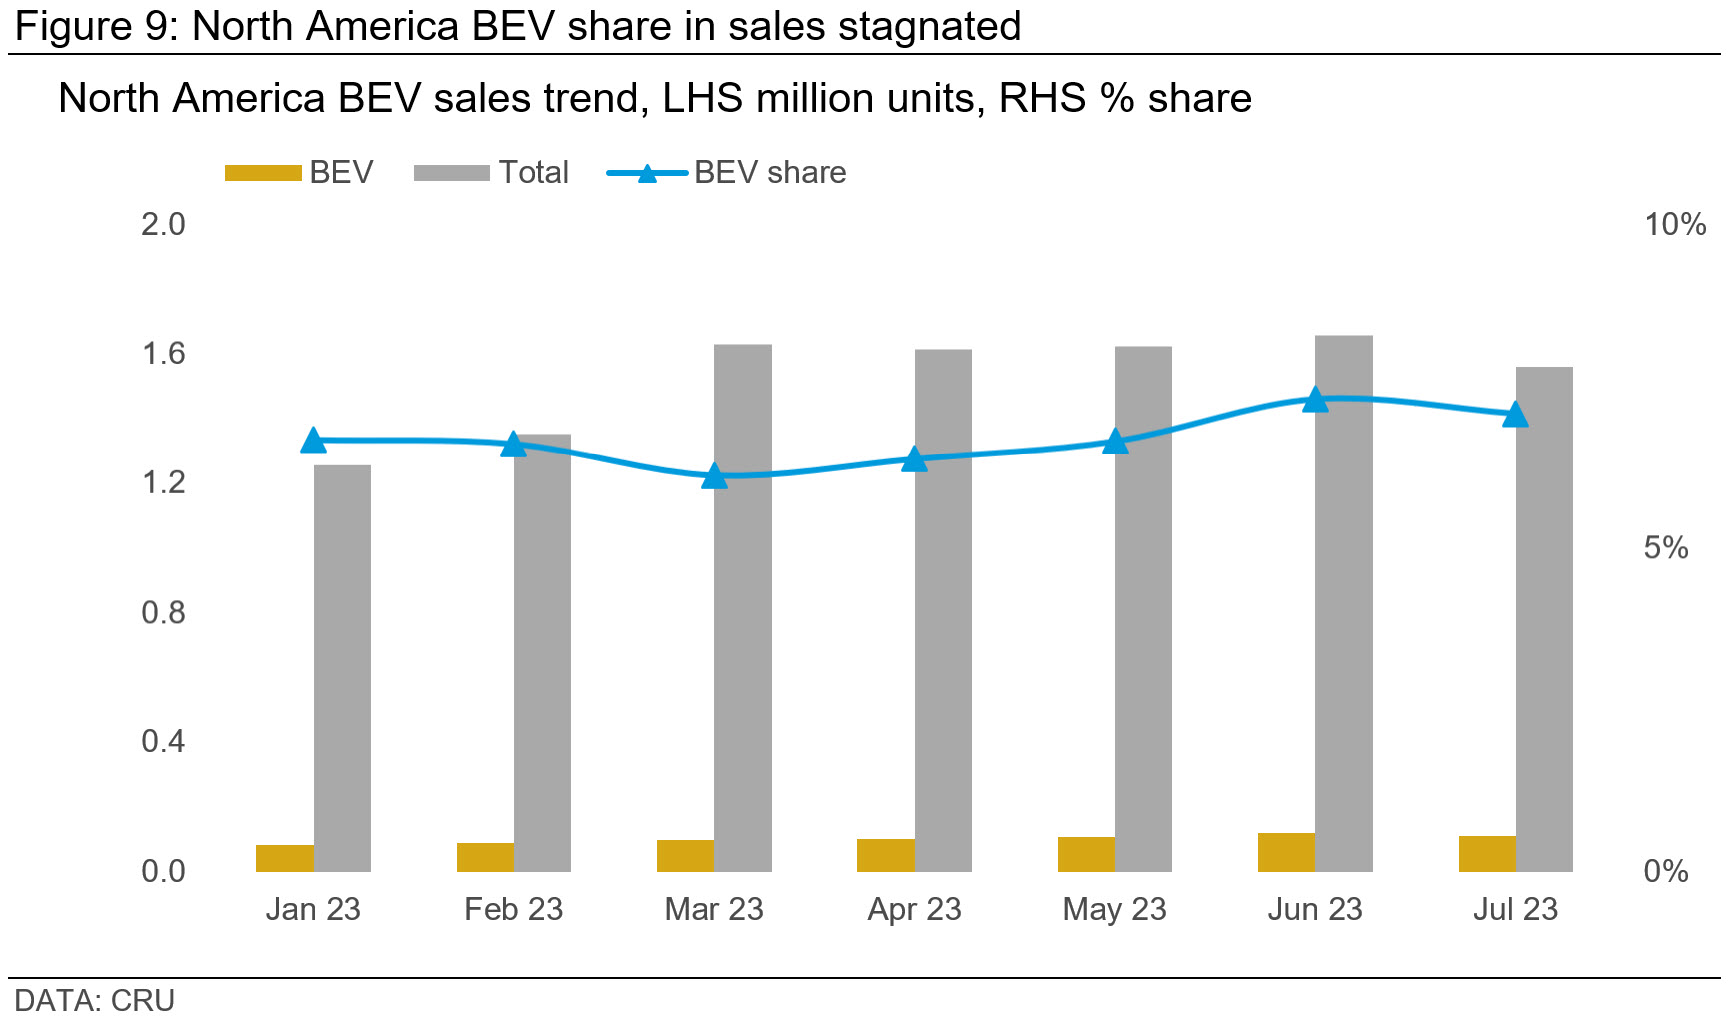 Graph showing that North America BEV share in sales stagnated